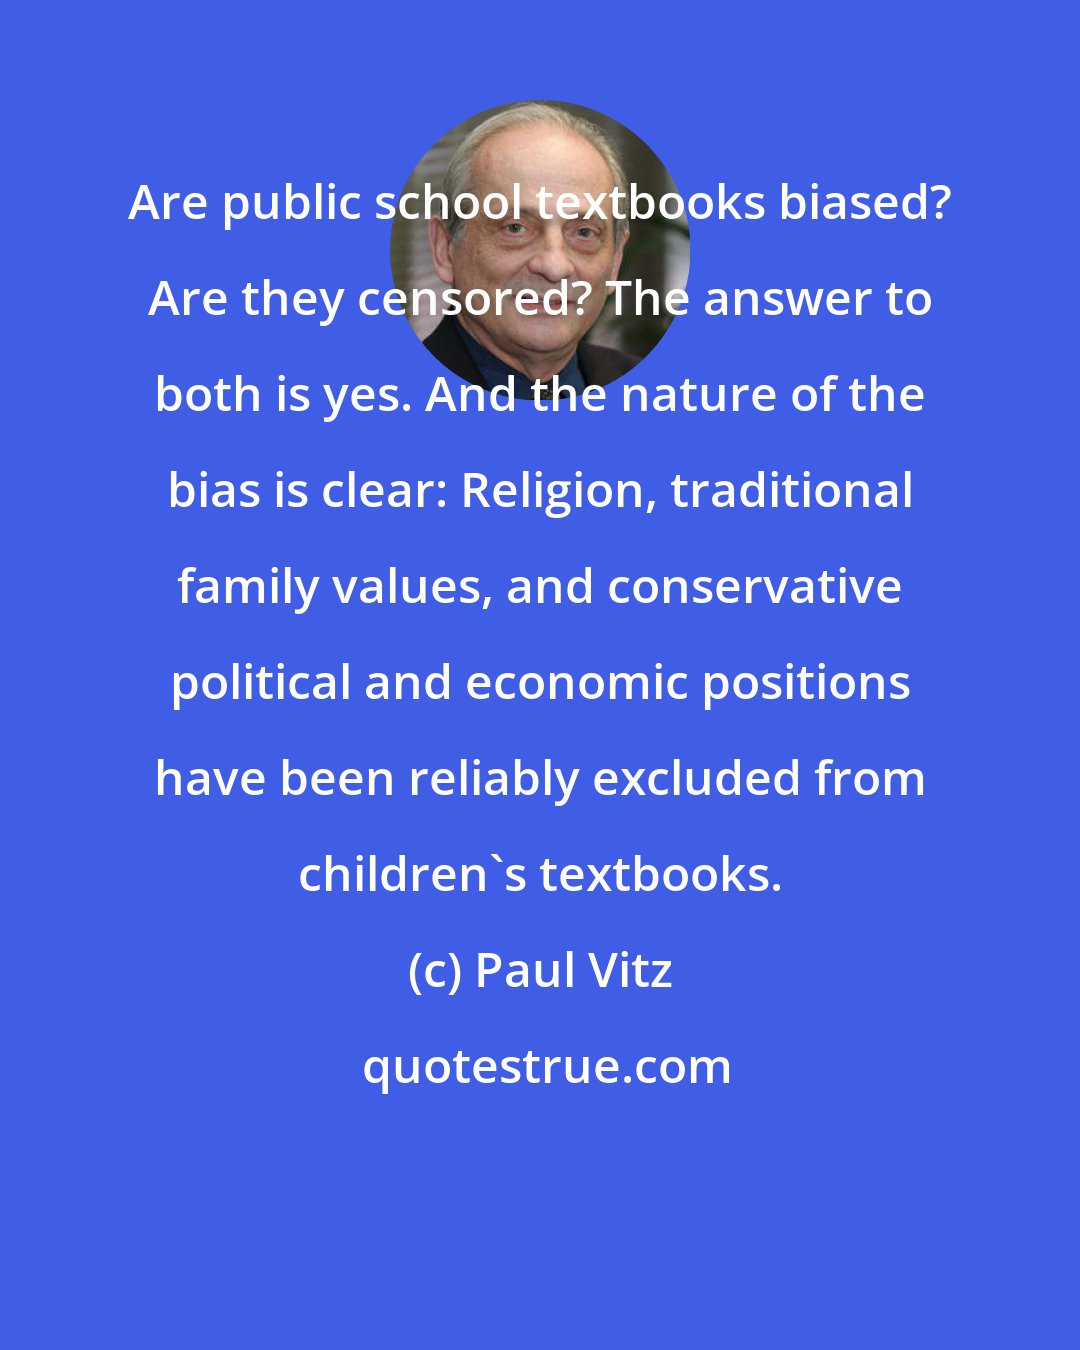 Paul Vitz: Are public school textbooks biased? Are they censored? The answer to both is yes. And the nature of the bias is clear: Religion, traditional family values, and conservative political and economic positions have been reliably excluded from children's textbooks.